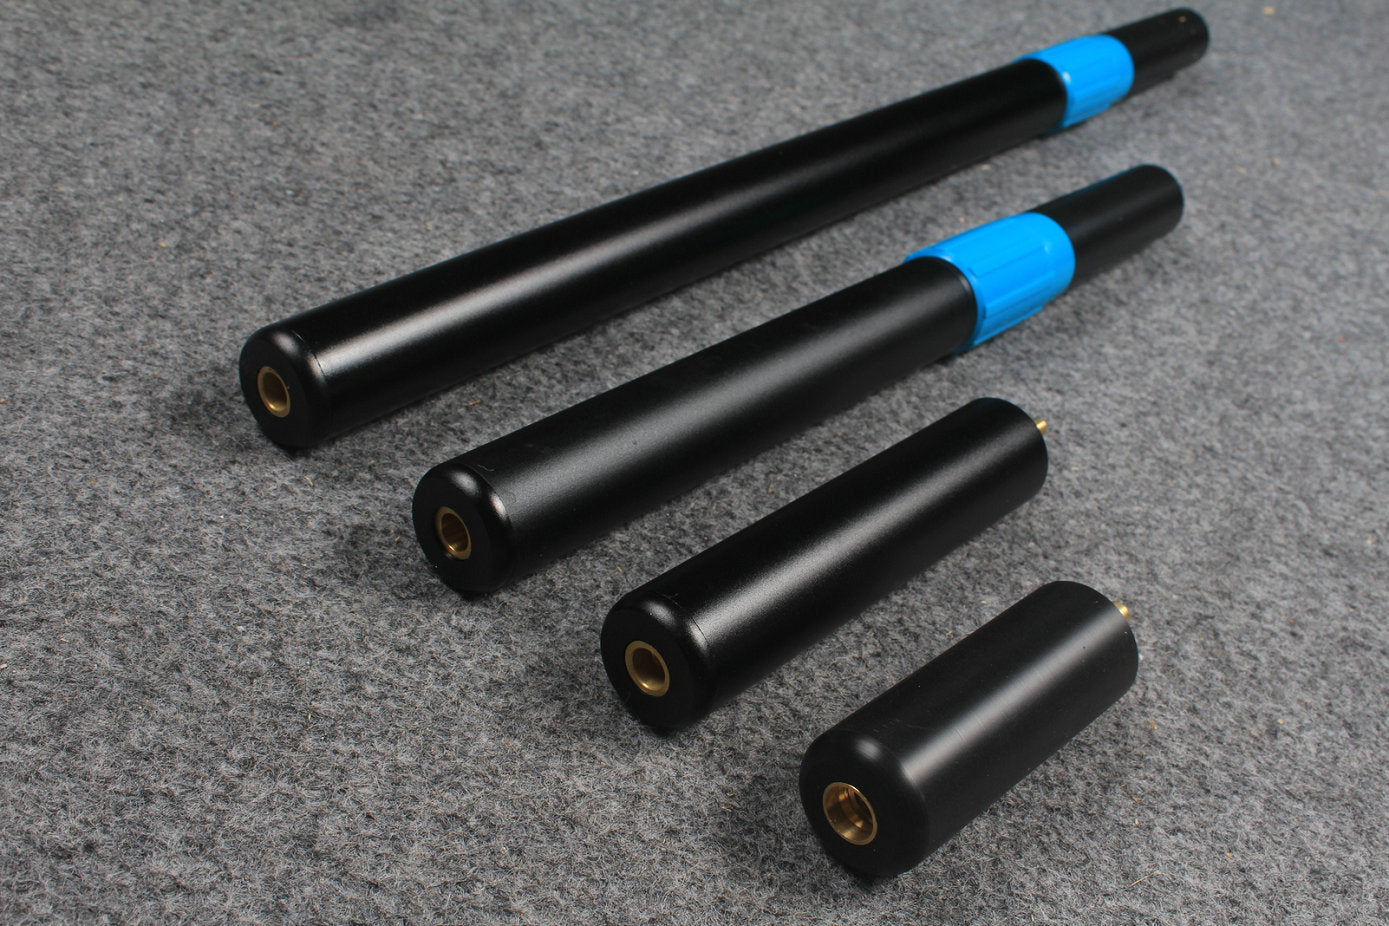 snooker cue telescopic extension connecter - various length